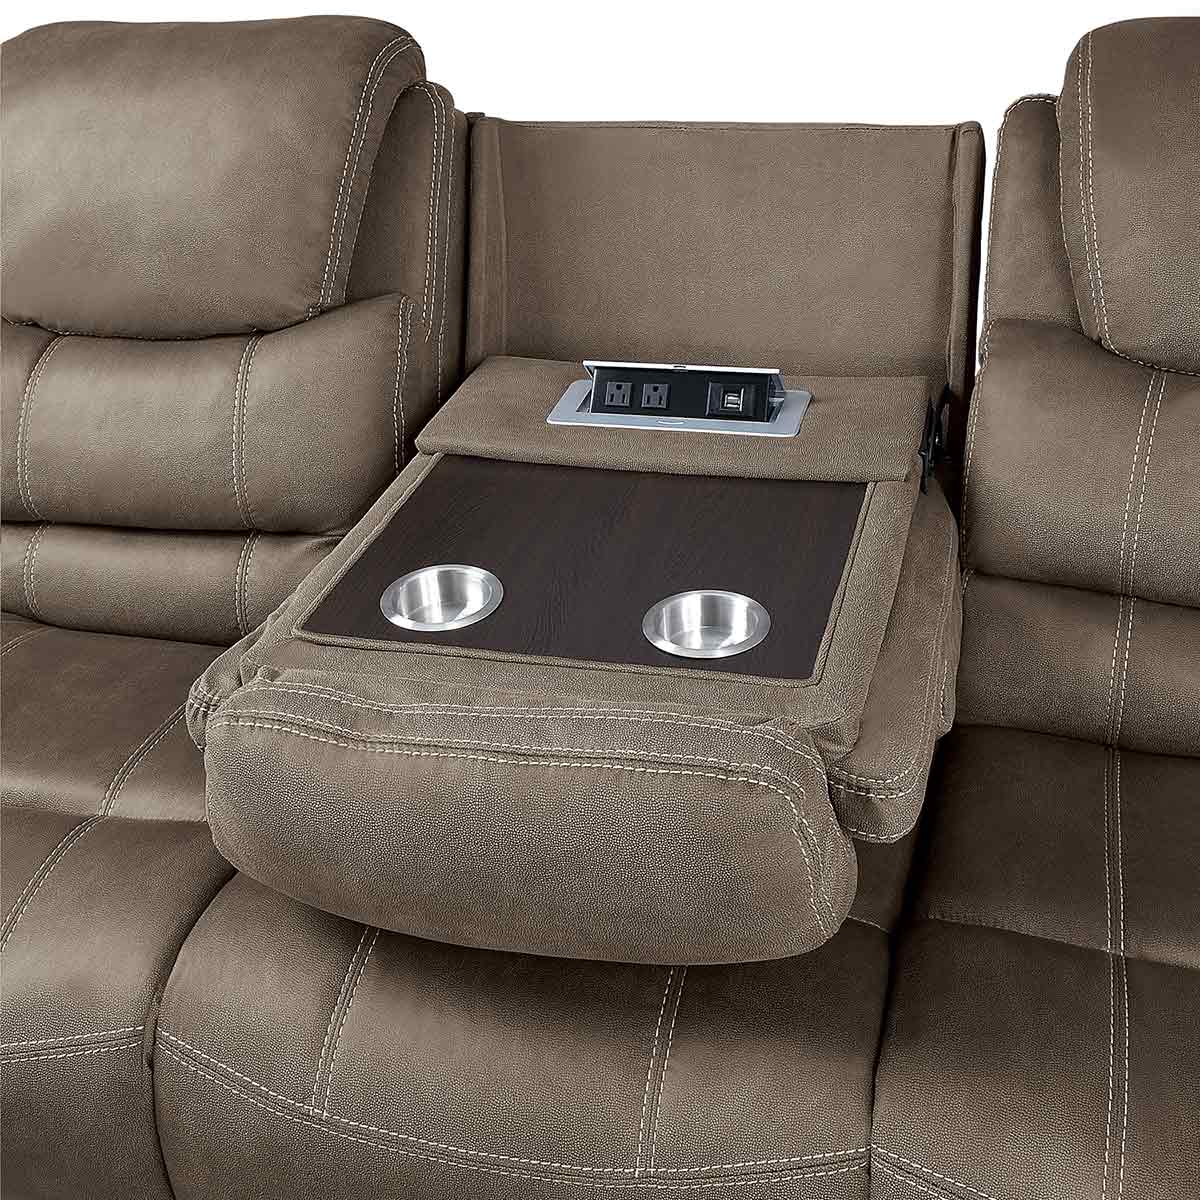 Homelegance Shola Double Reclining Sofa with Drop-Down Cup holders and Receptacles - Brown